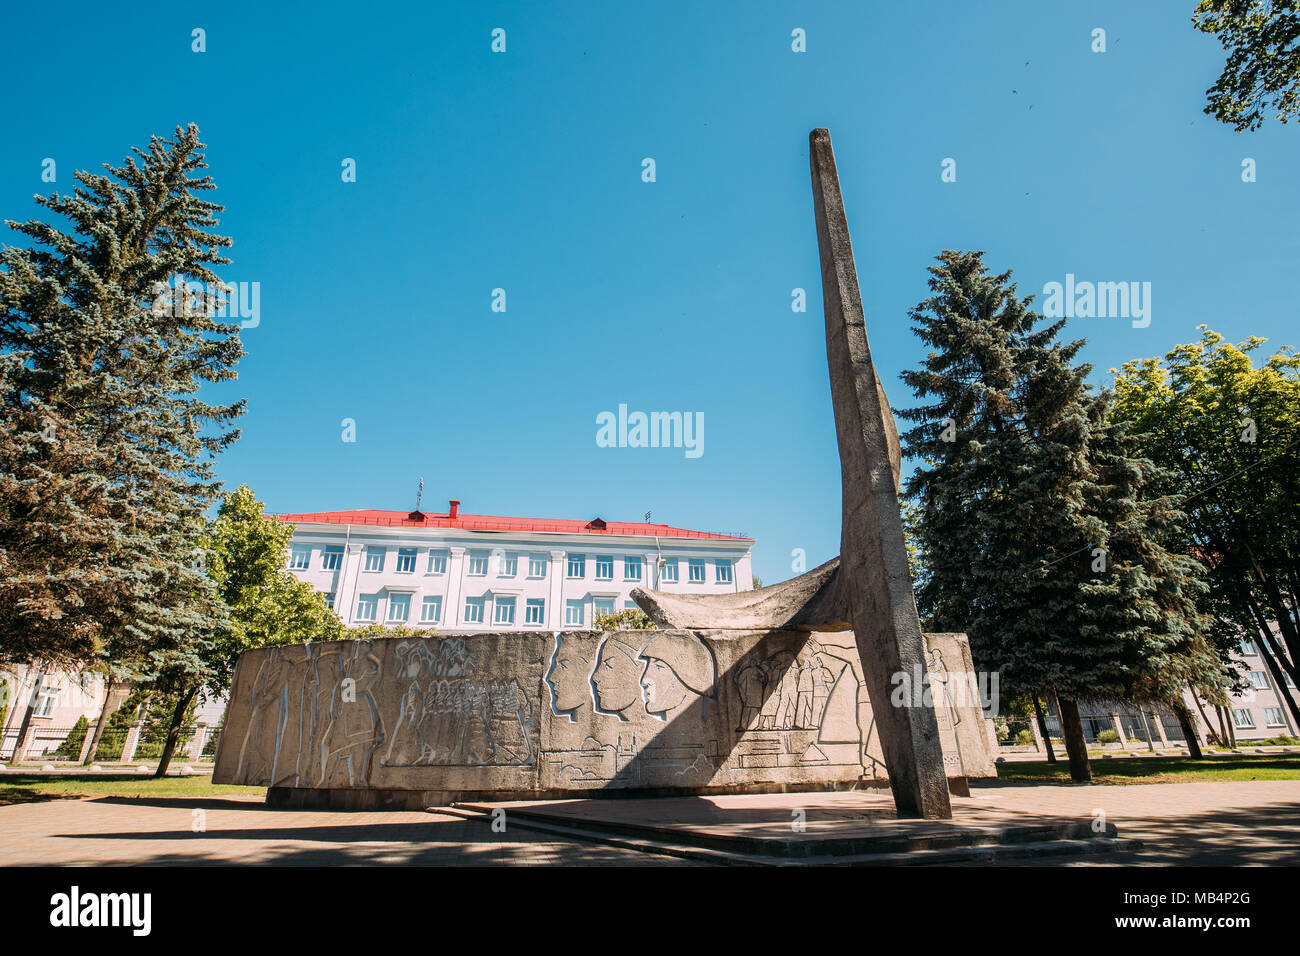 Polotsk, Belarus. Monument To Soviet Soldiers Dedicated To Memory Of Great Patriotic War. Summer Sunny Day. Stock Photo